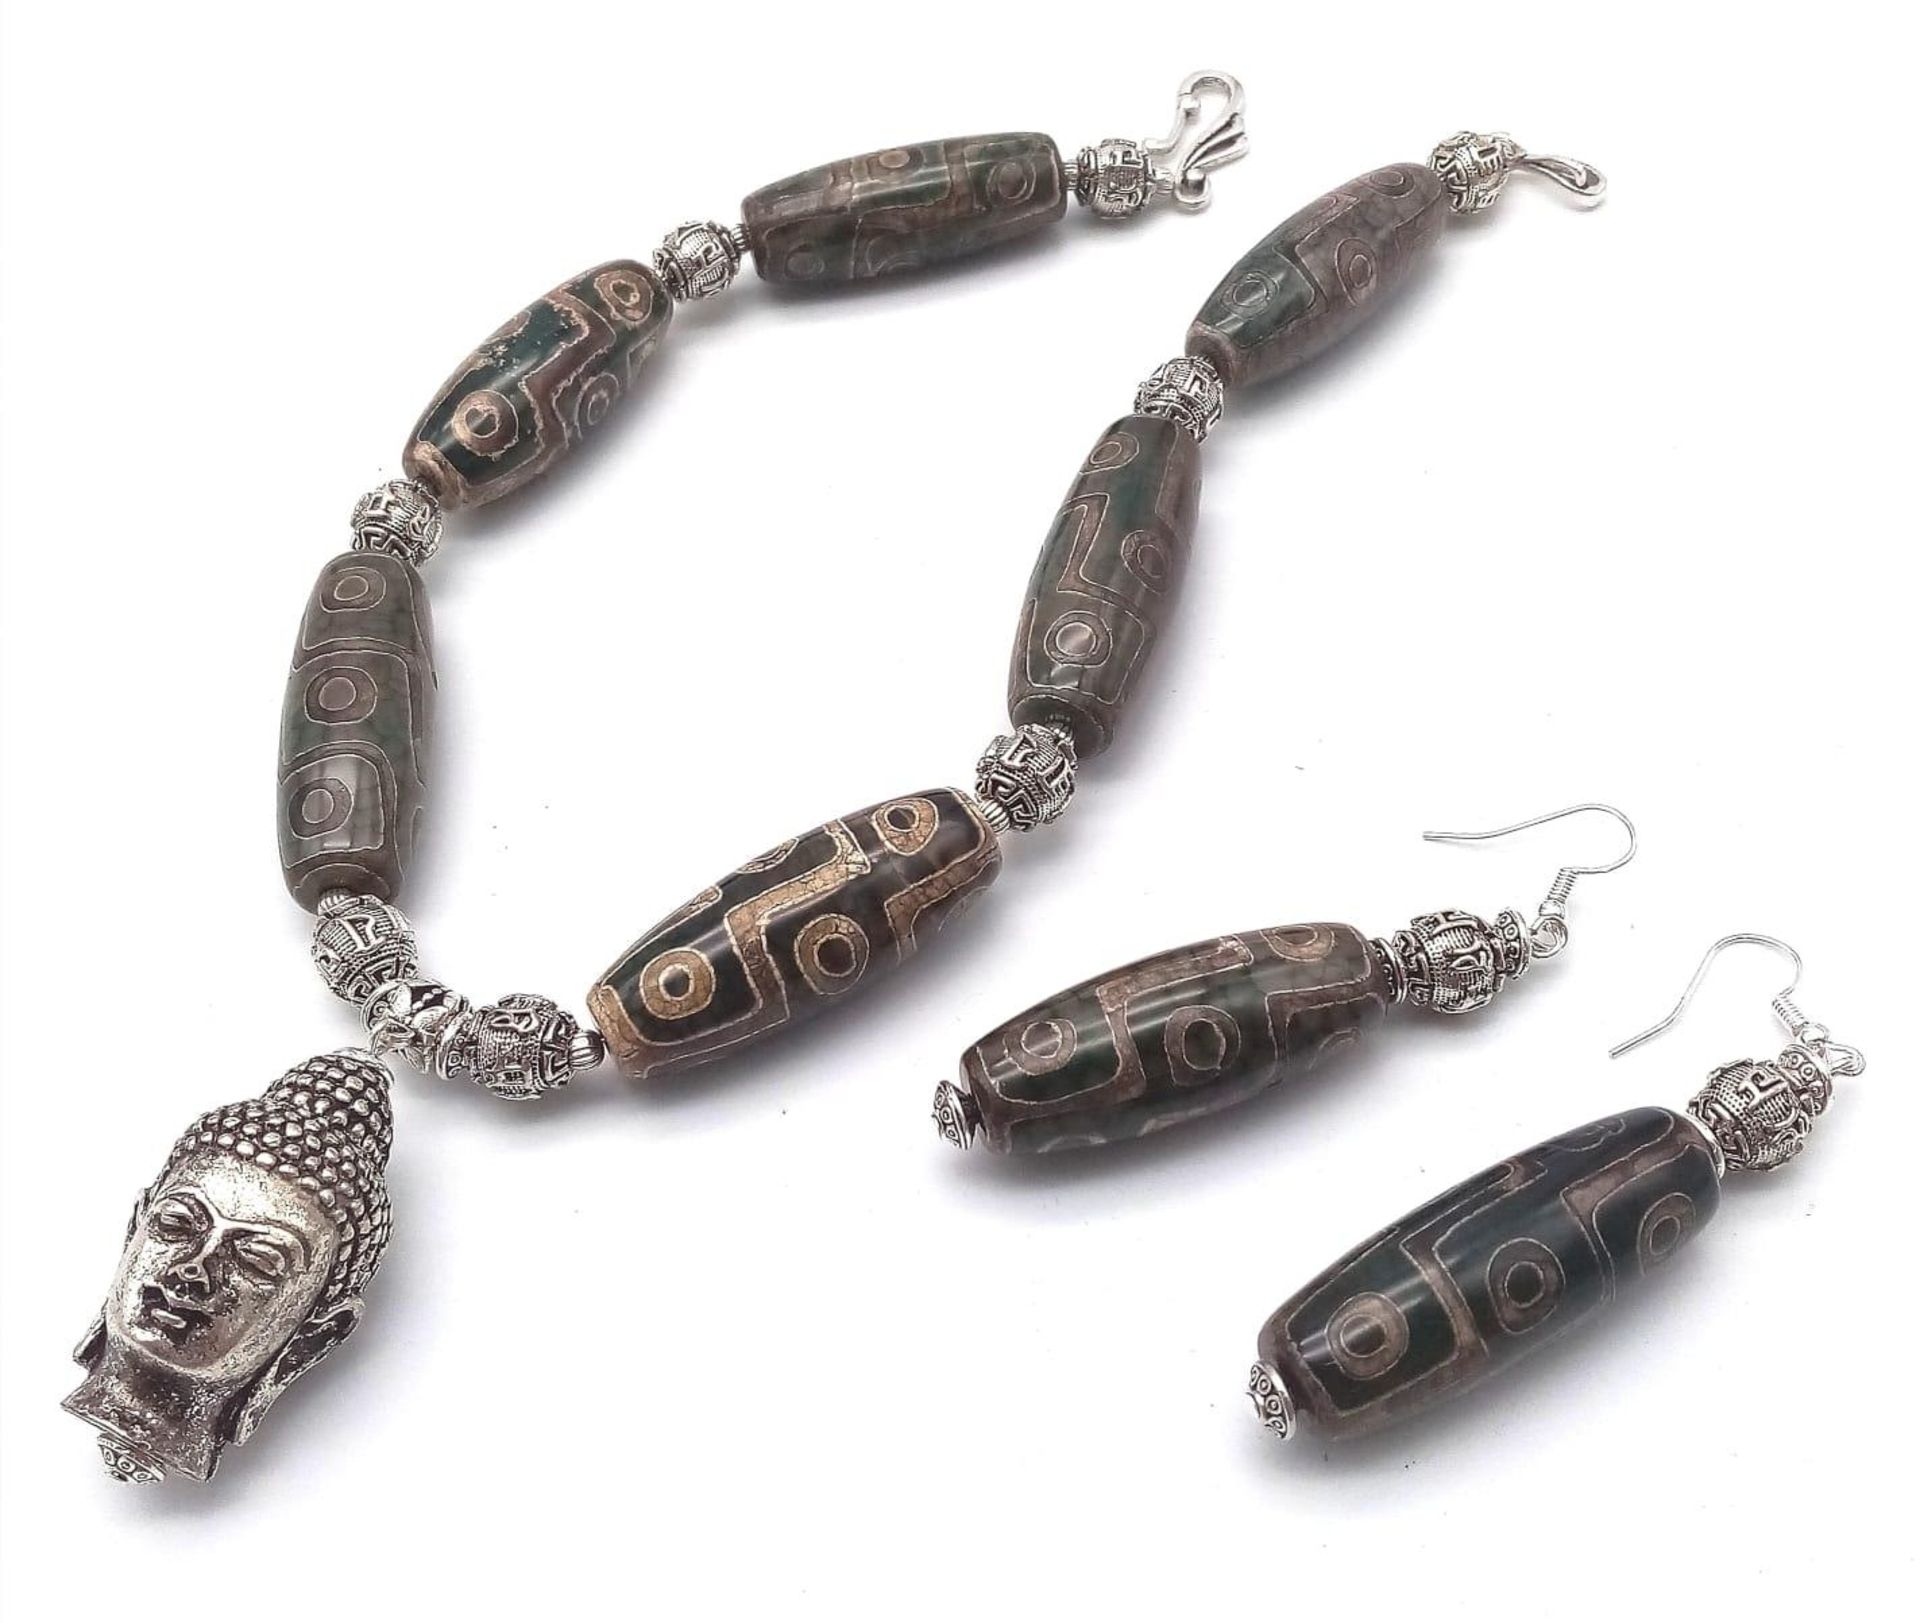 A Tibetan treasure: a nine eyed, large DZI beaded necklace and earrings set with a young Buddha head